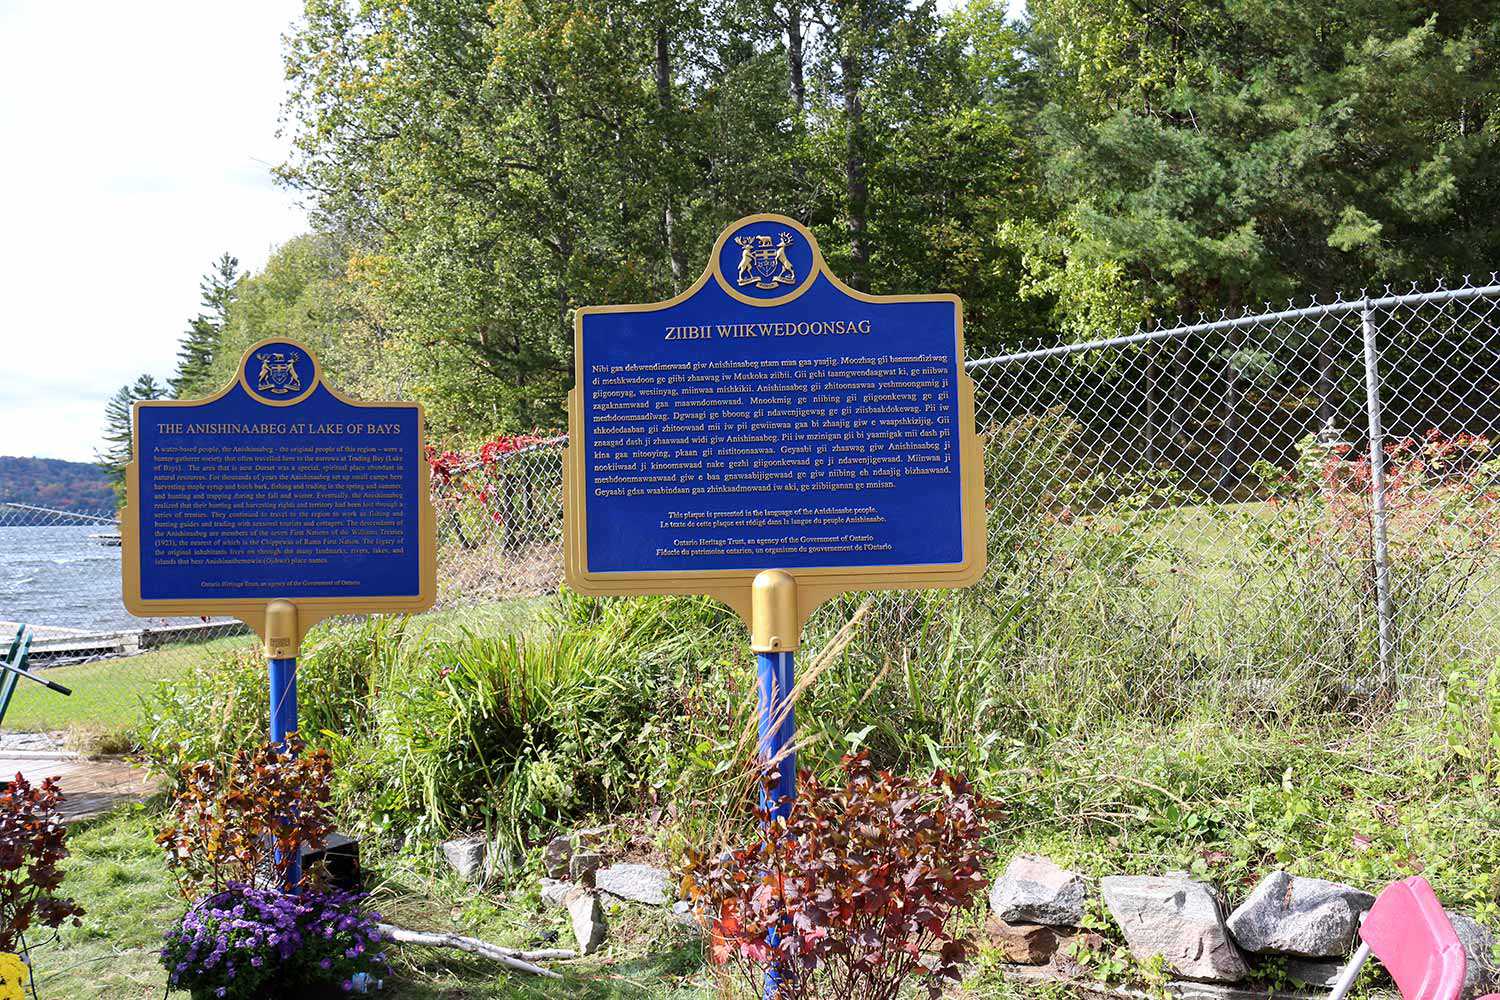 Provincial plaque commemorating the Anishinaabeg at Lake of Bays